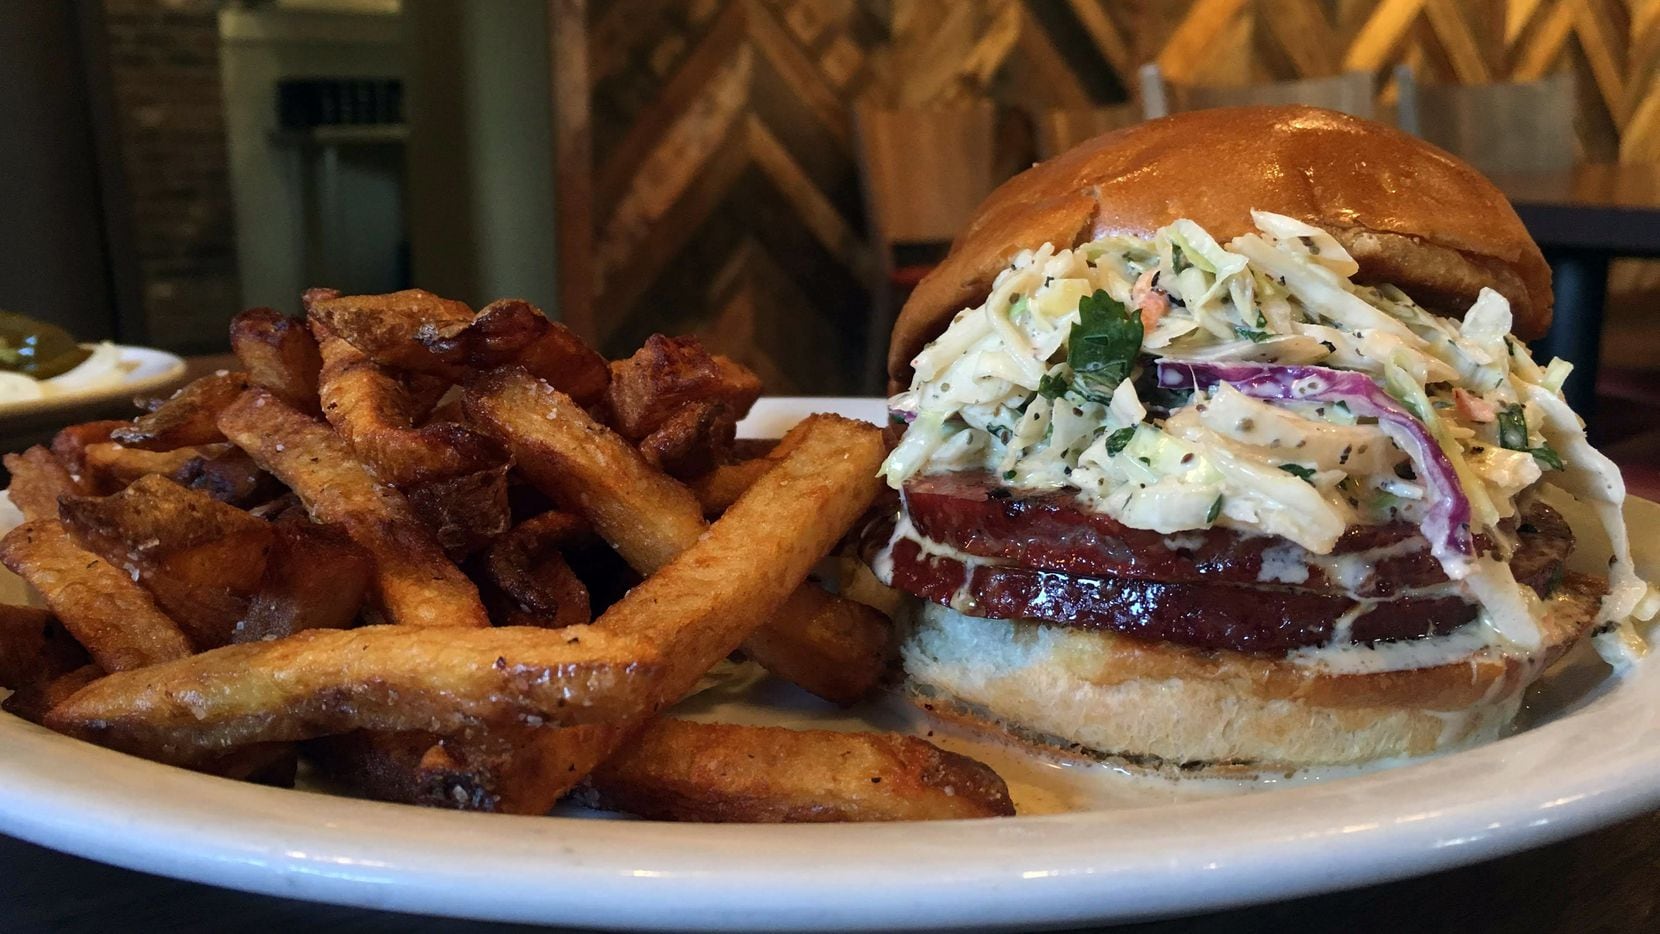 Lakewood Smokehouse's bologna sandwich was excellent, says our sandwich expert Nick Rallo....